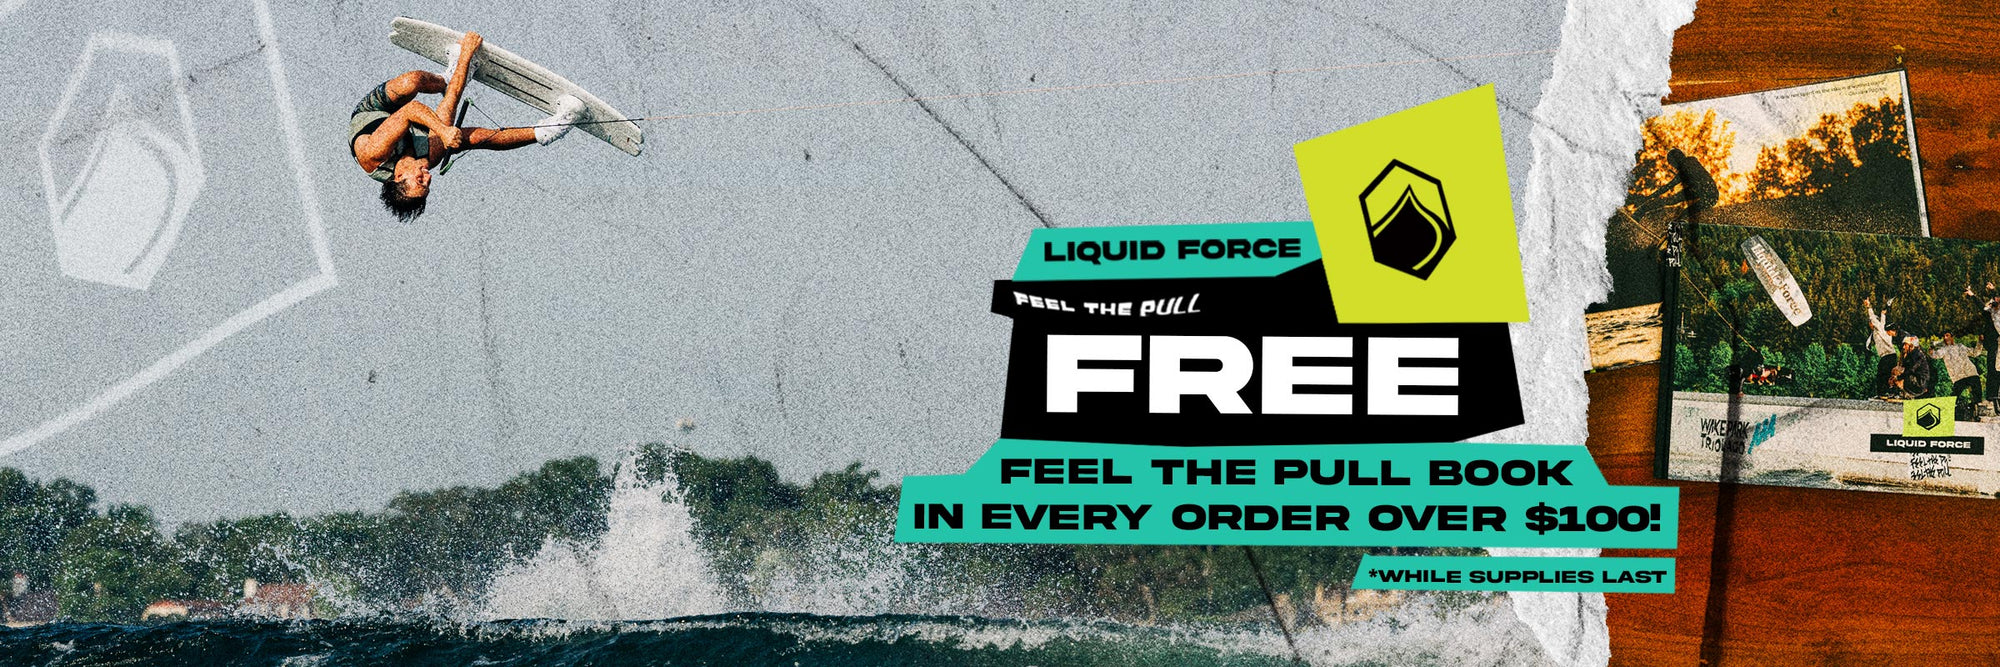 Free Feel the Pull Book in Every Order Over $100